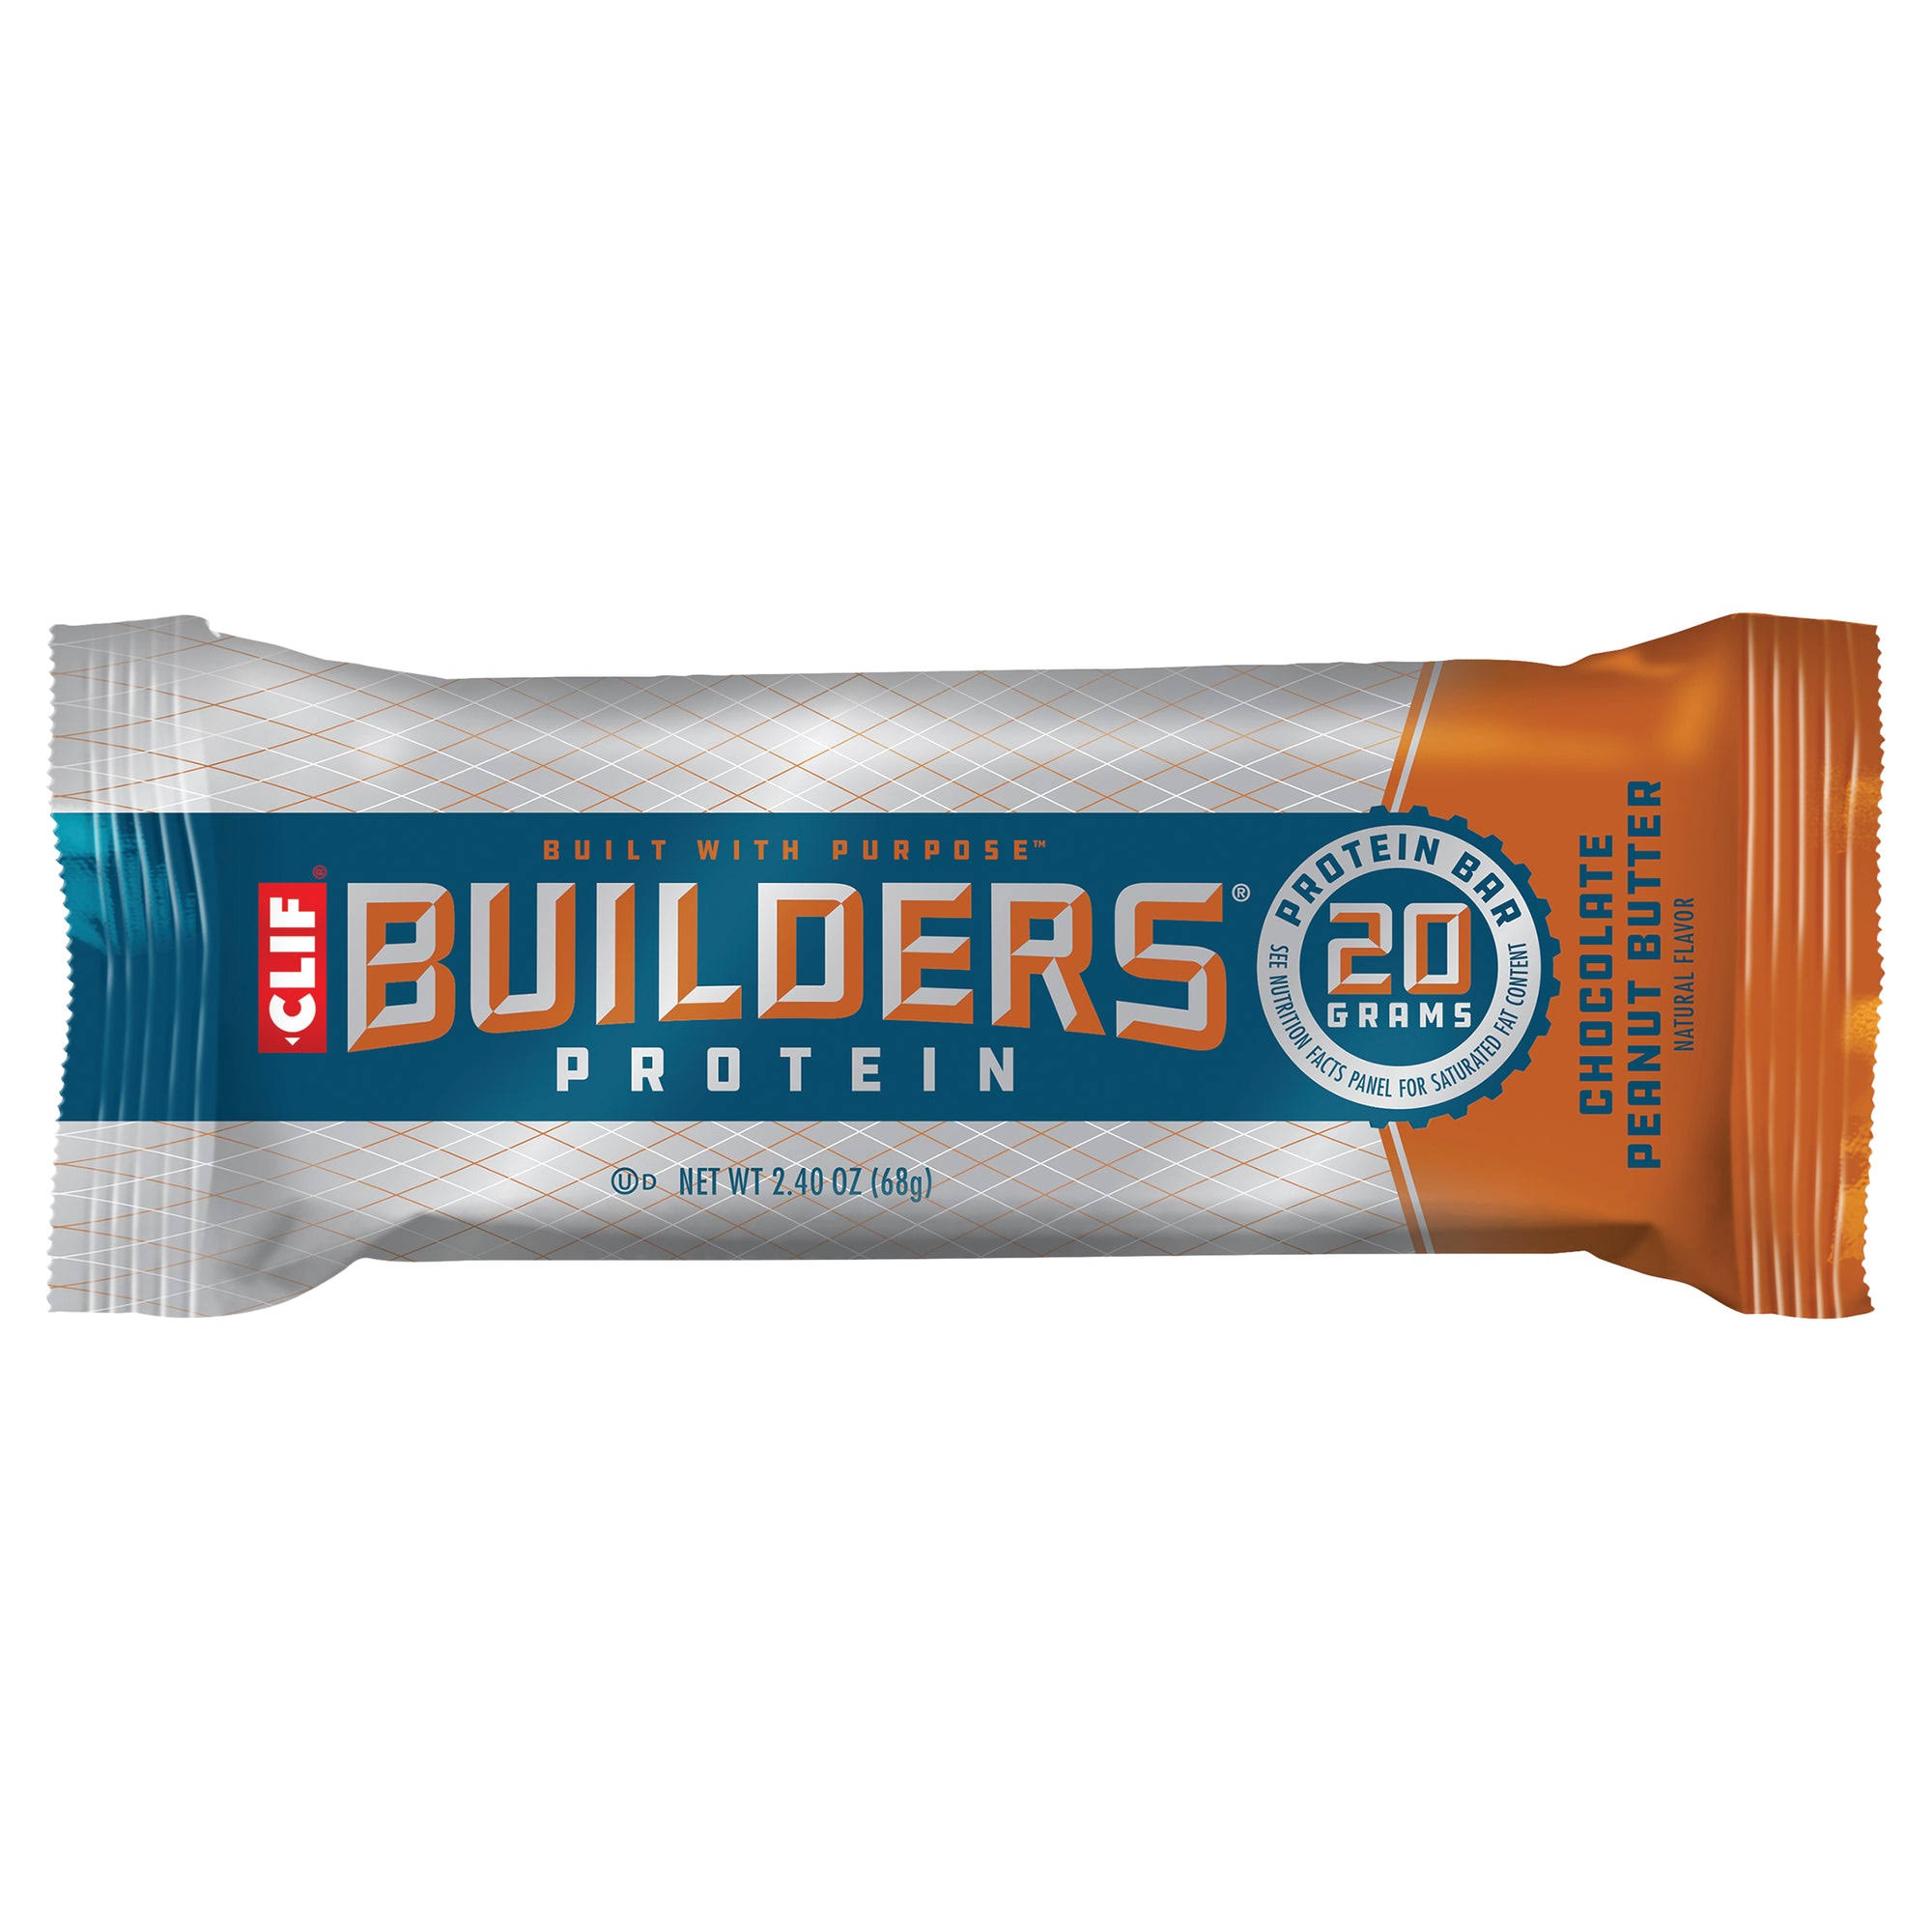 Clif Builder's Chocolate Peanut Butter Protein Bar - 2.4 oz packet